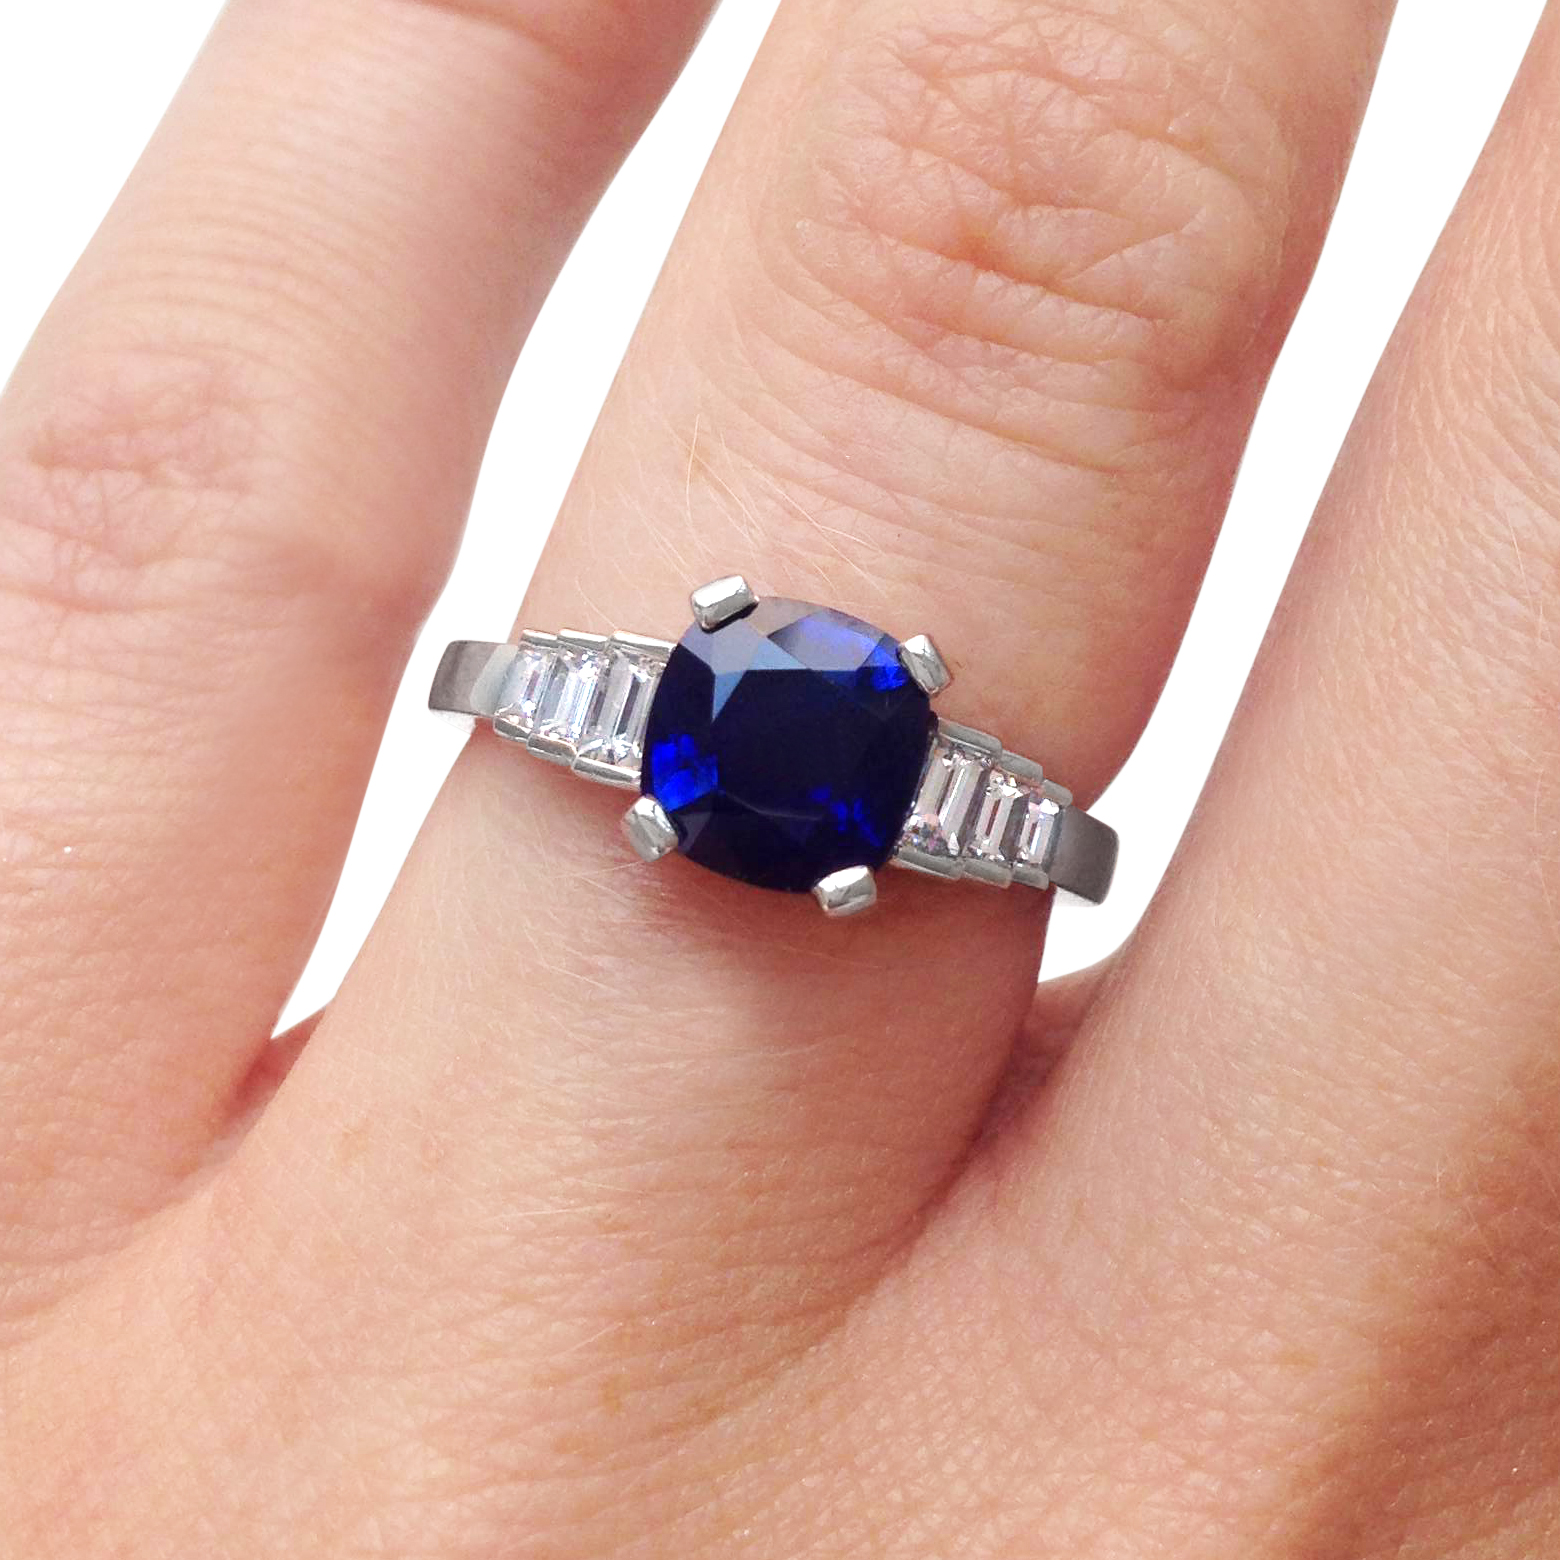 cushion-shpaed-sapphire-and-diamond-baguette-cut-ring-mounted-in-platinum.jpg